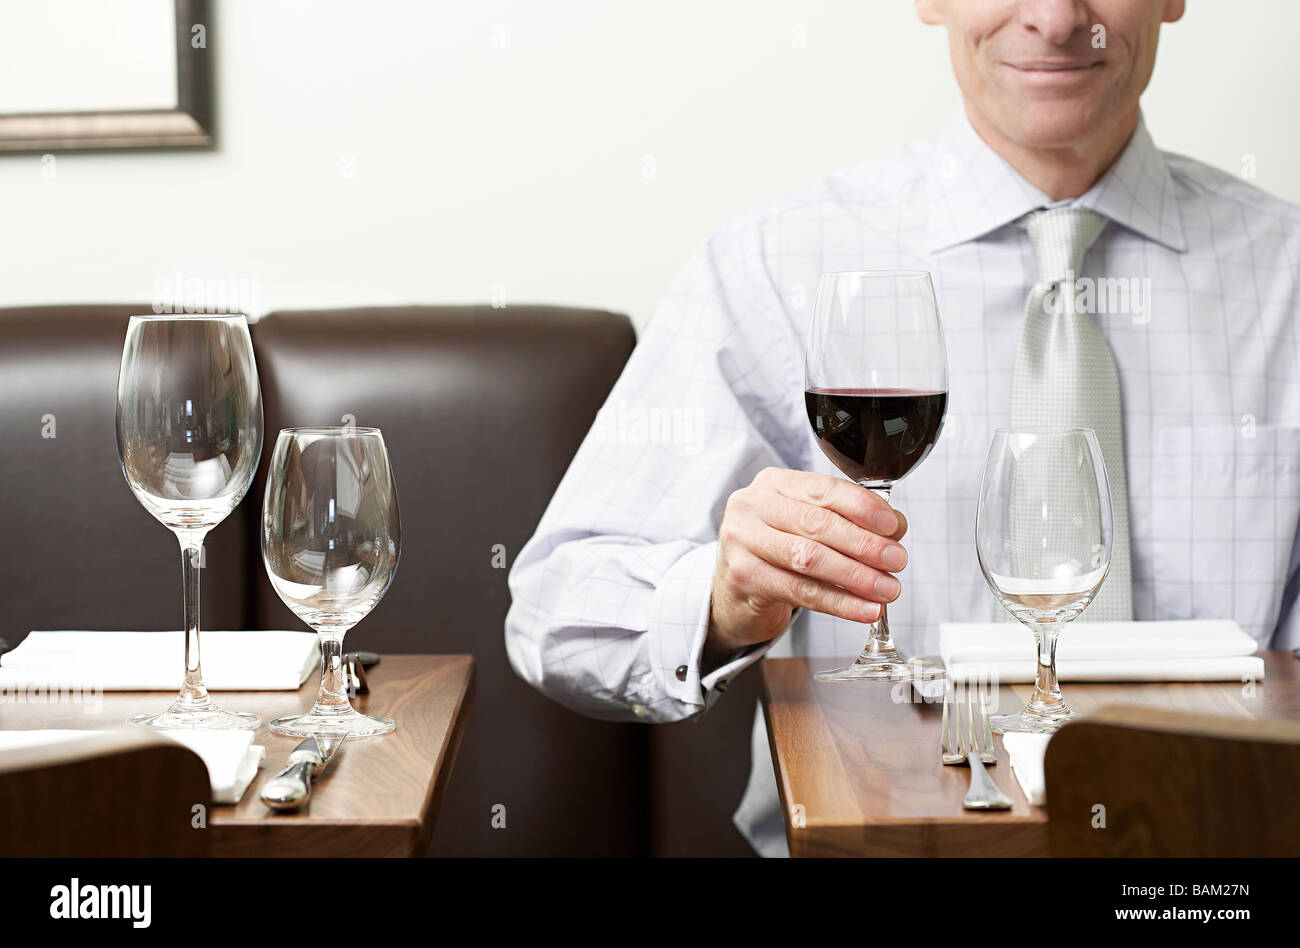 A man holding a glass of red wine Stock Photo